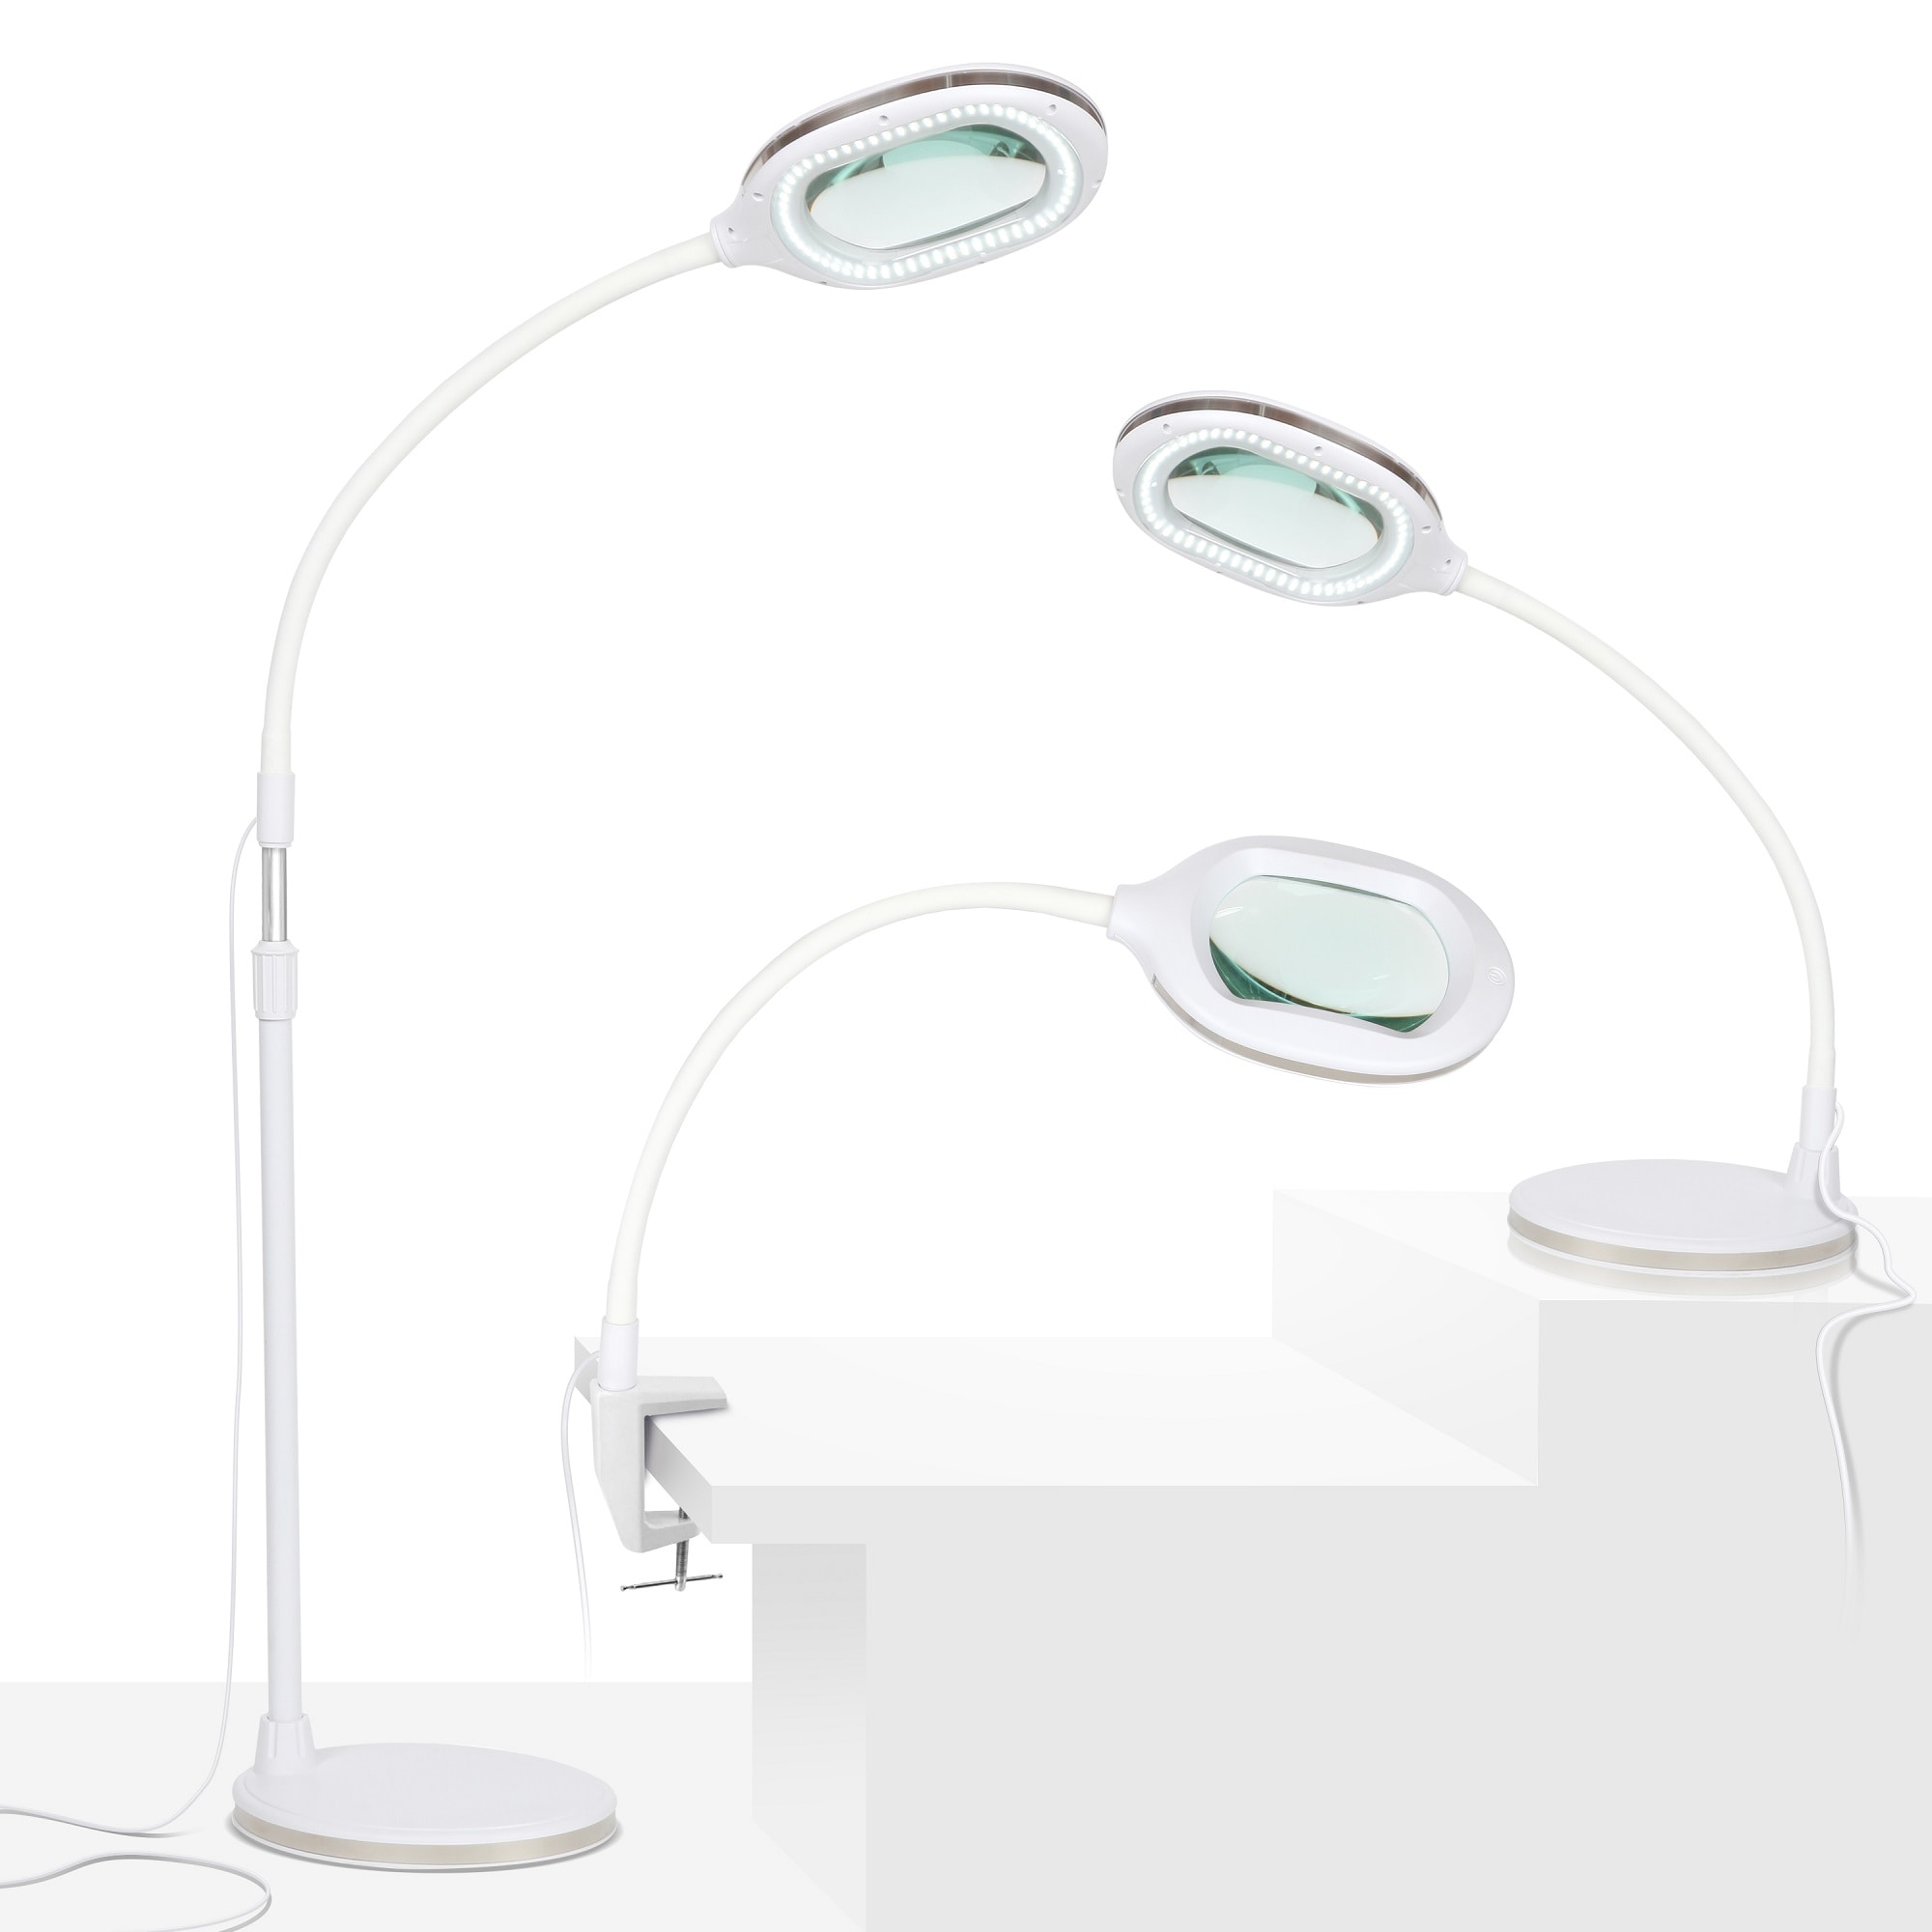 Brightech LightView Pro 3 in 1 Magnifying Adjustable Floor and Desk Lamp, White